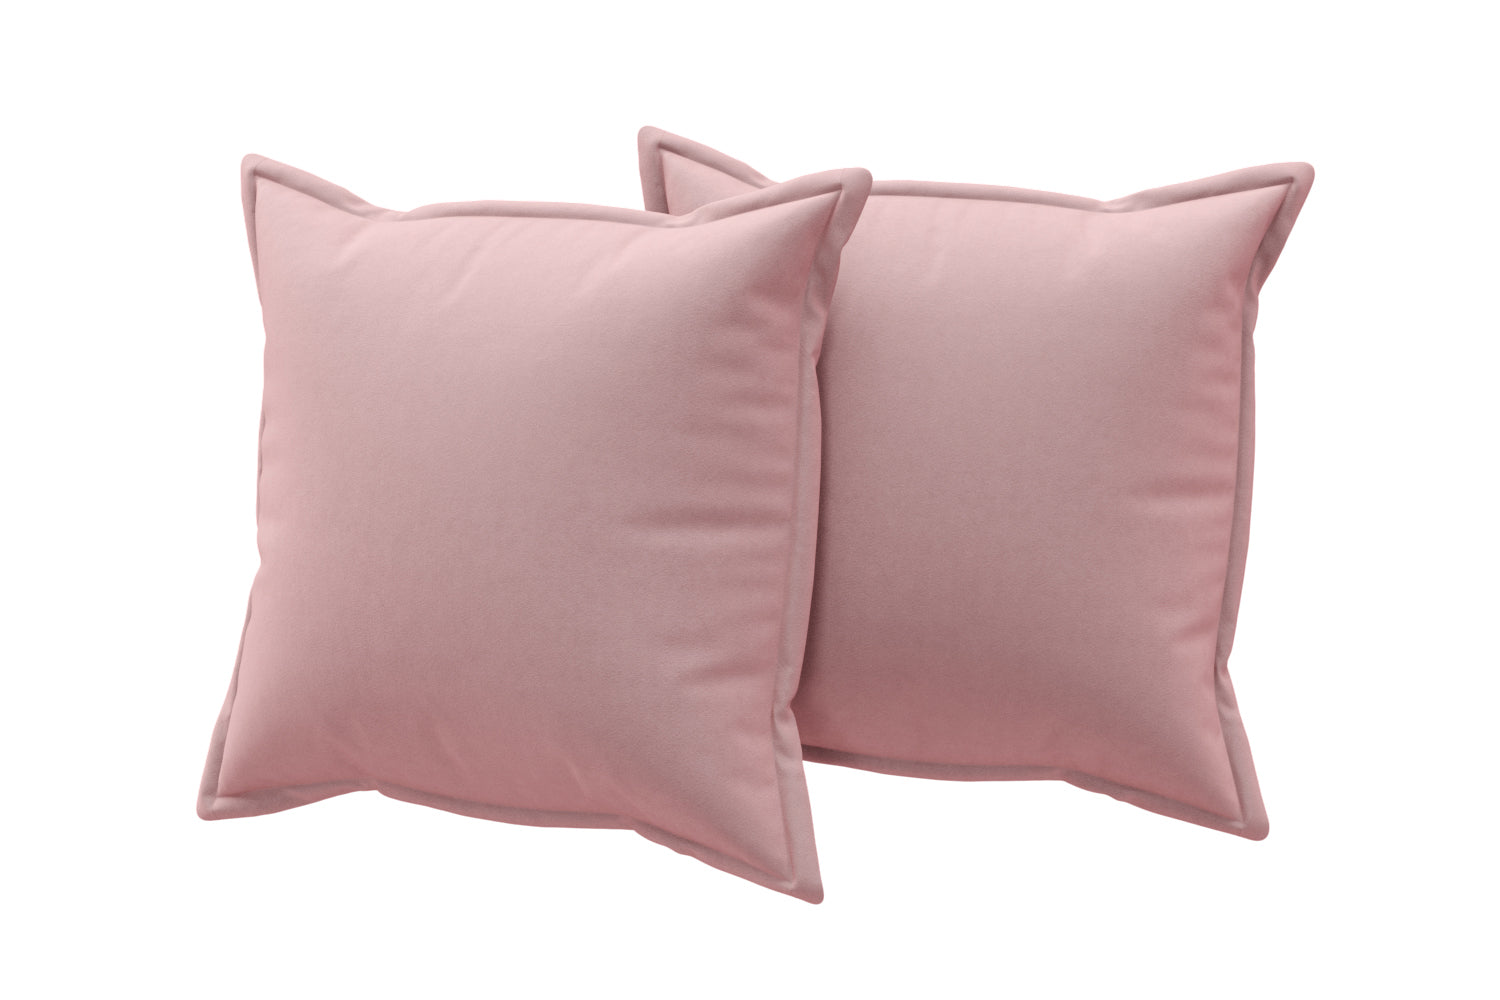 Accessories - Pair of Edged Scatter Cushions - Blush